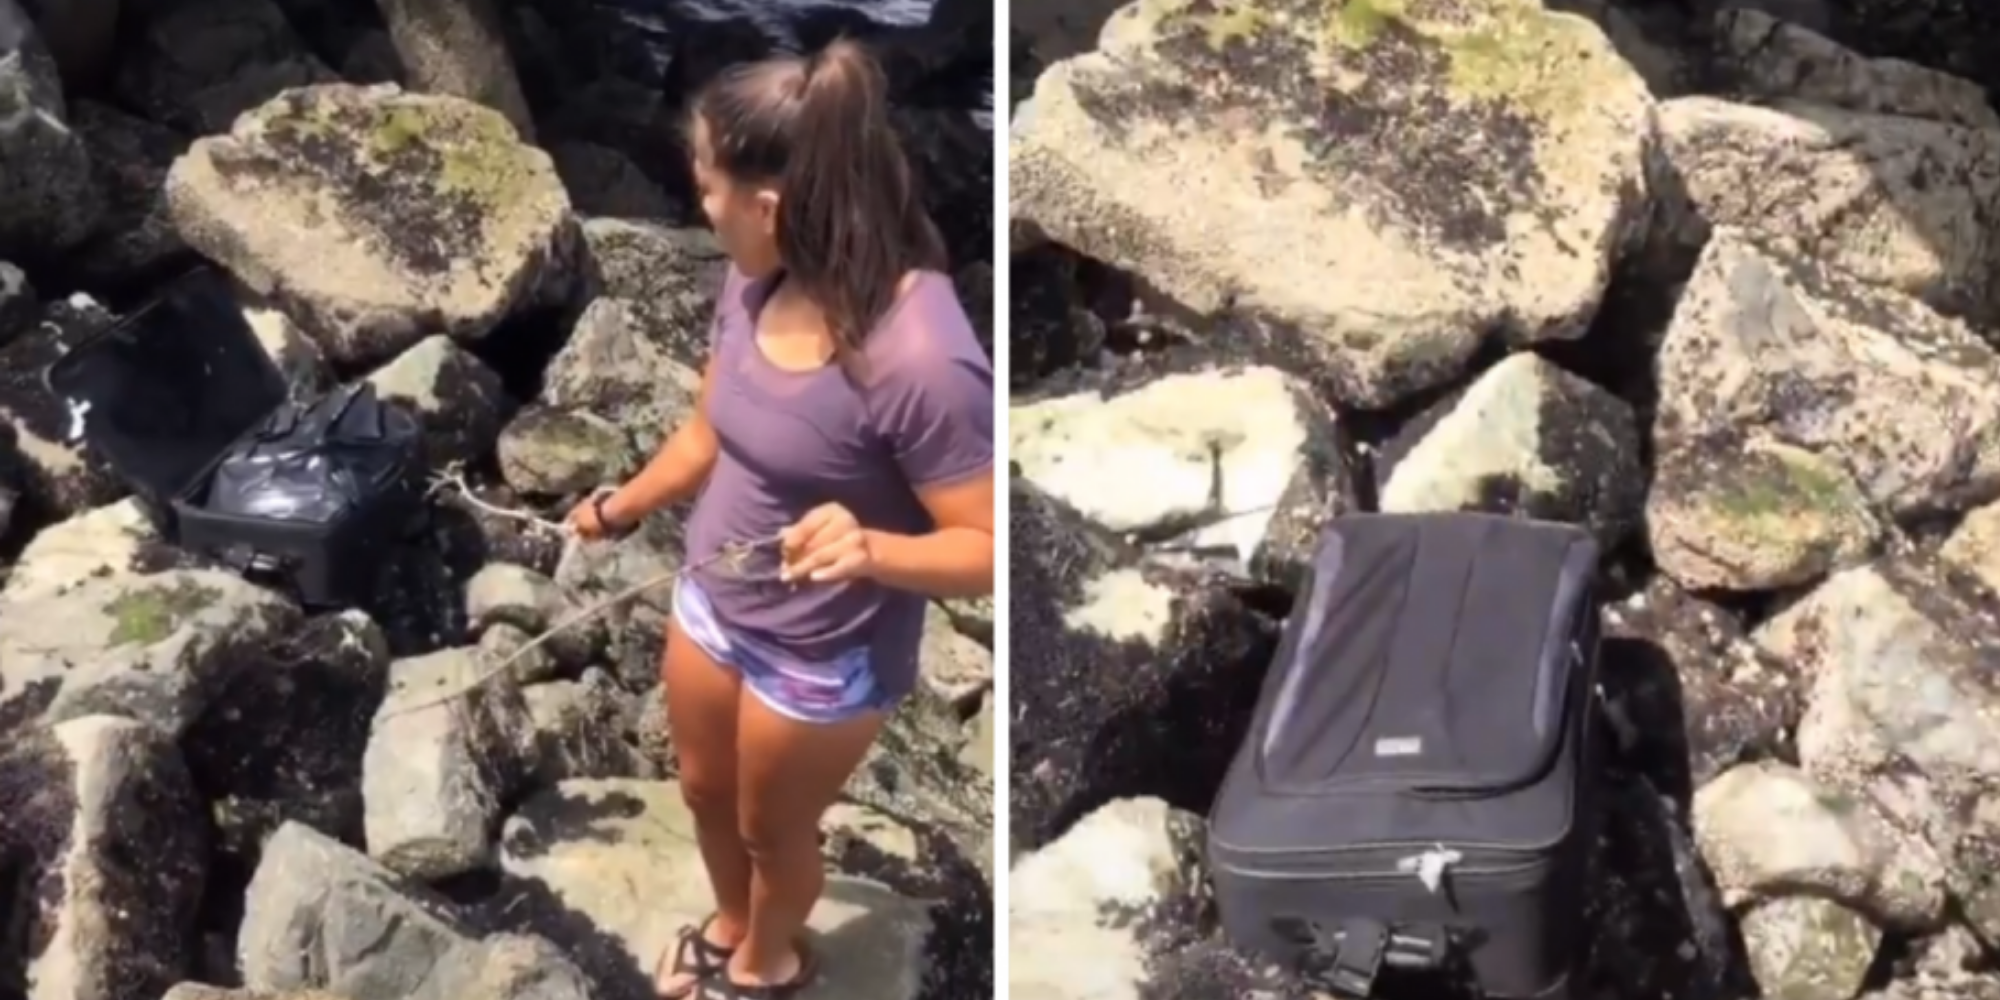 Tiktok Teens Claim They Found Suitcase Filled With Human Remains While Using Randonautica App